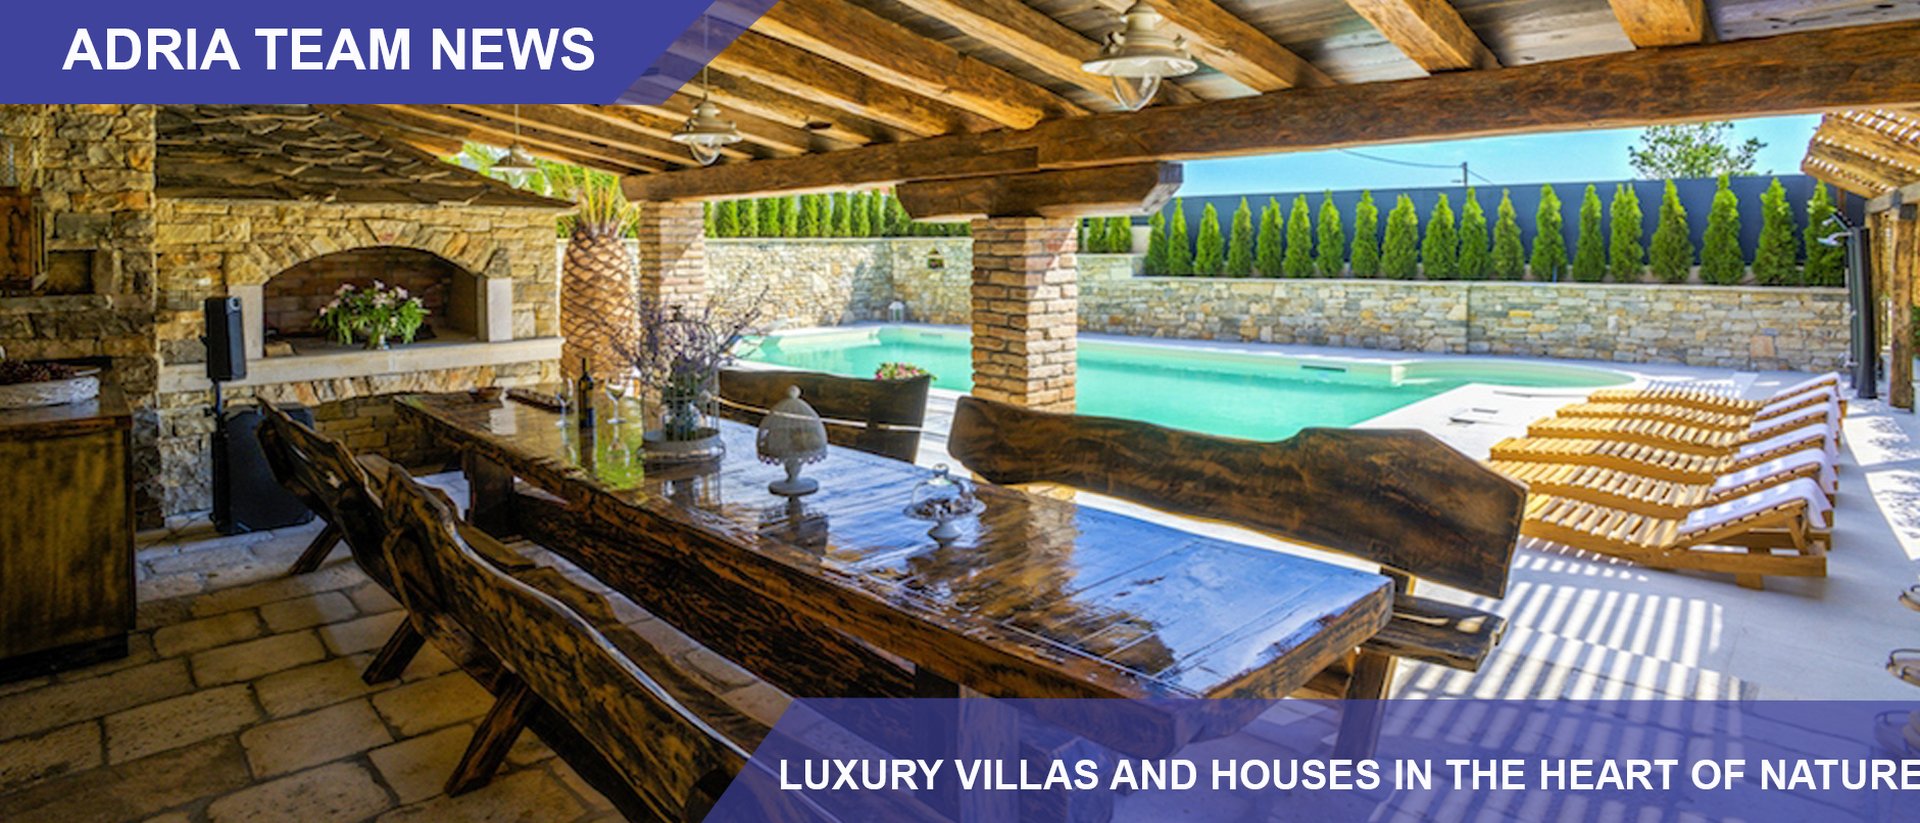 LUXURY VILLAS AND HOUSES IN THE HEART OF NATURE - INVEST IN RURAL TOURISM + LUXURY!